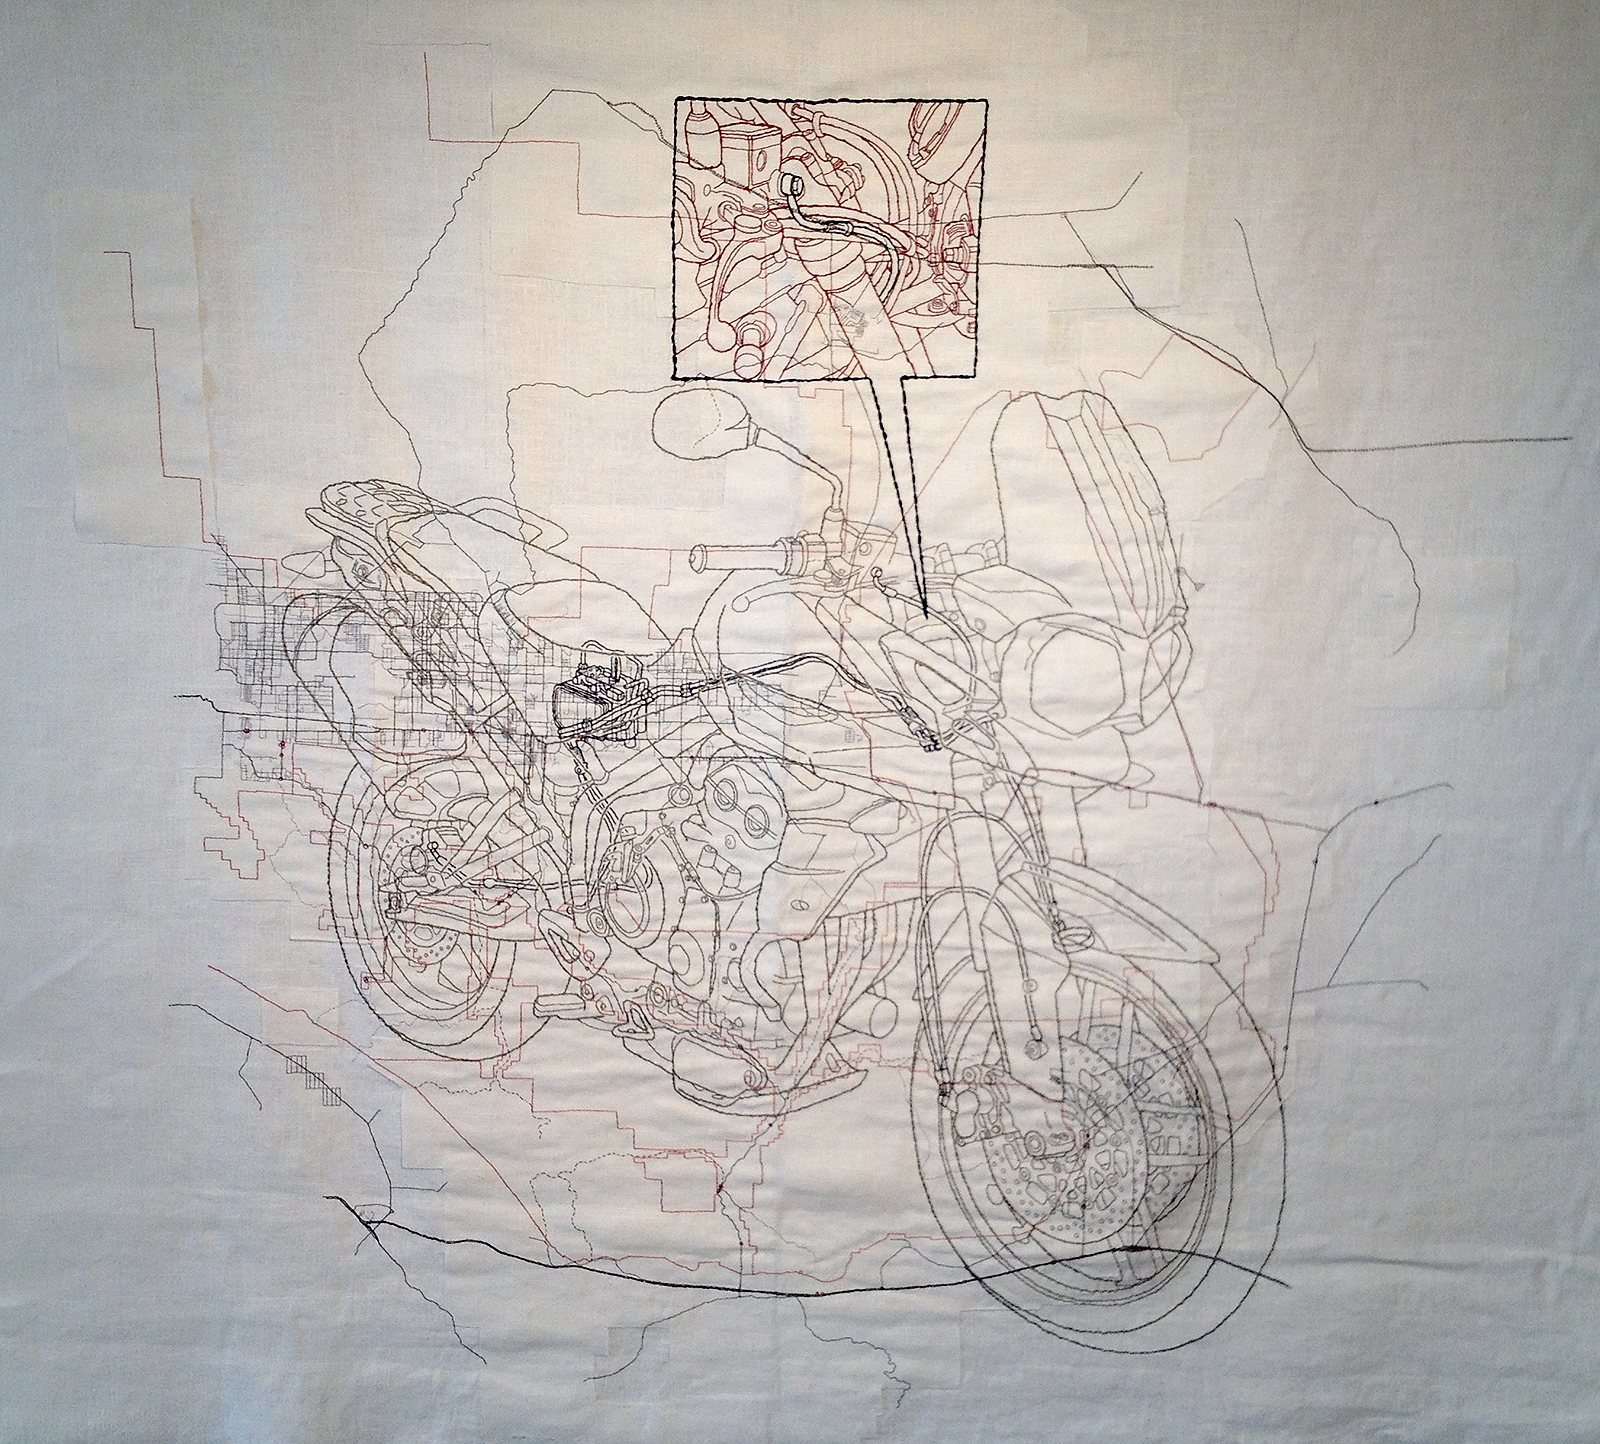 "Triumph," wall-size embroidery piece, 2013, Collection Cherryhurst House